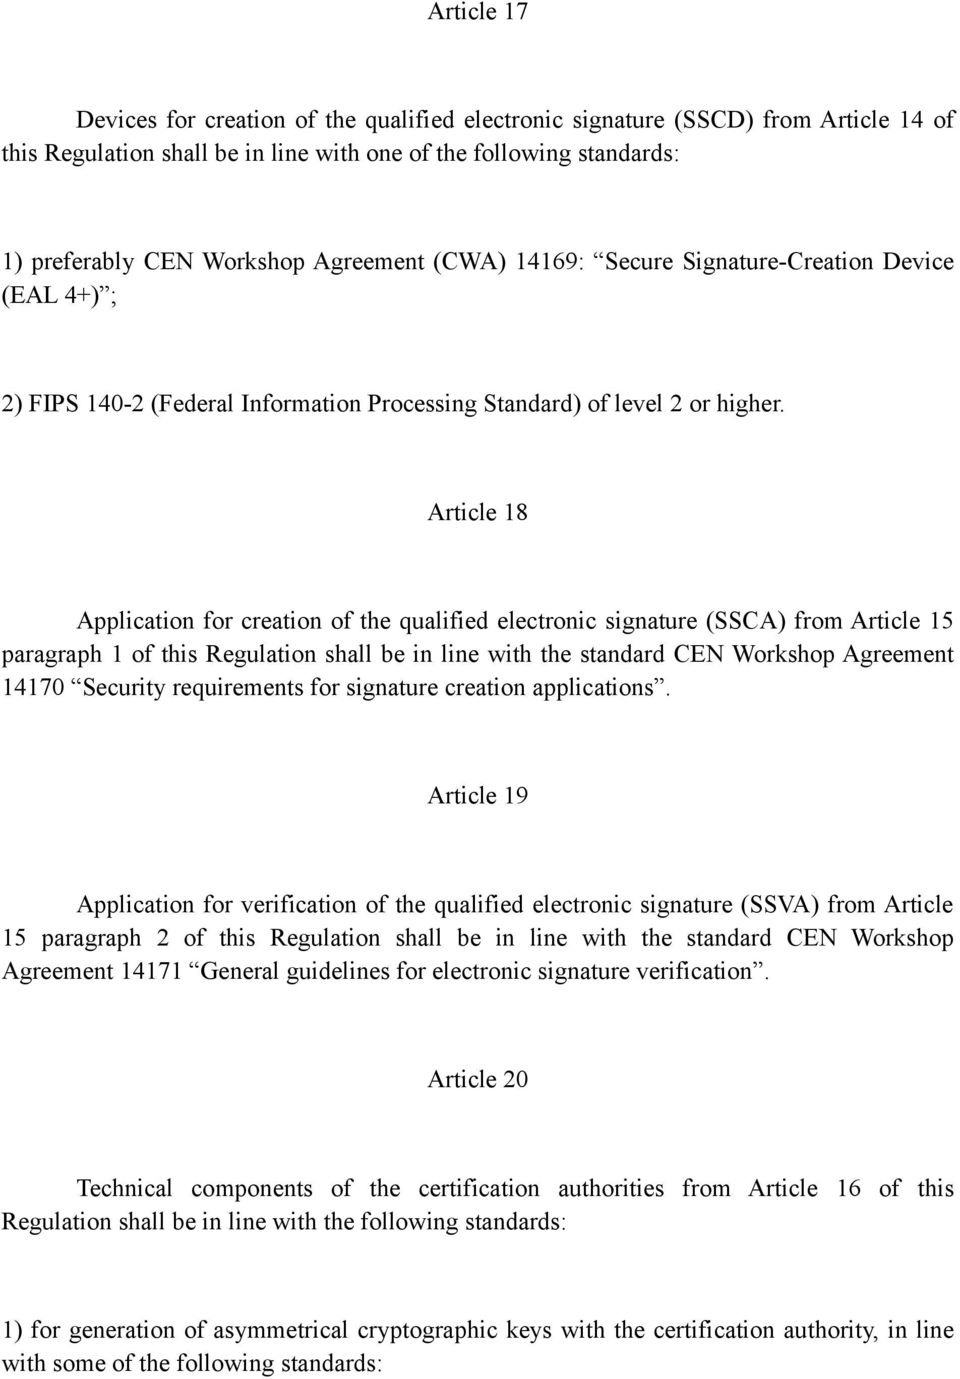 Article 18 Application for creation of the qualified electronic signature (SSCA) from Article 15 paragraph 1 of this Regulation shall be in line with the standard CEN Workshop Agreement 14170